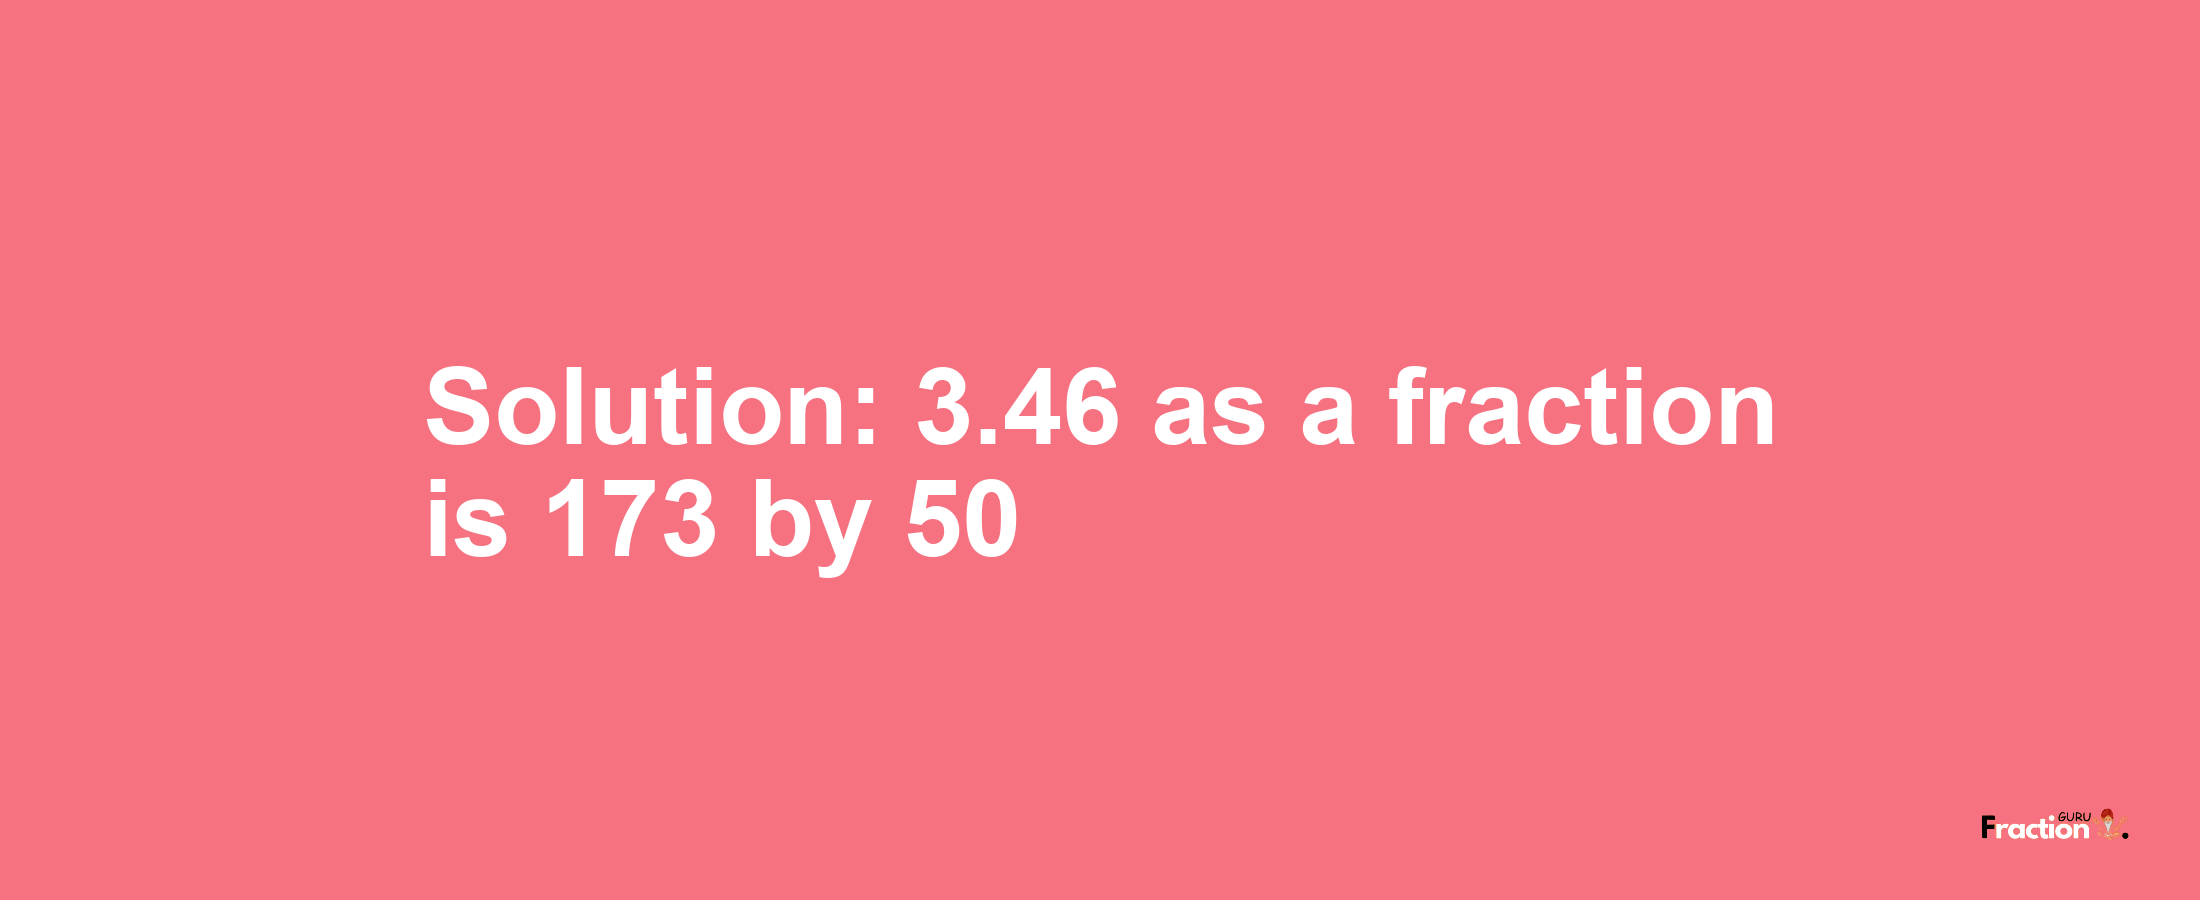 Solution:3.46 as a fraction is 173/50